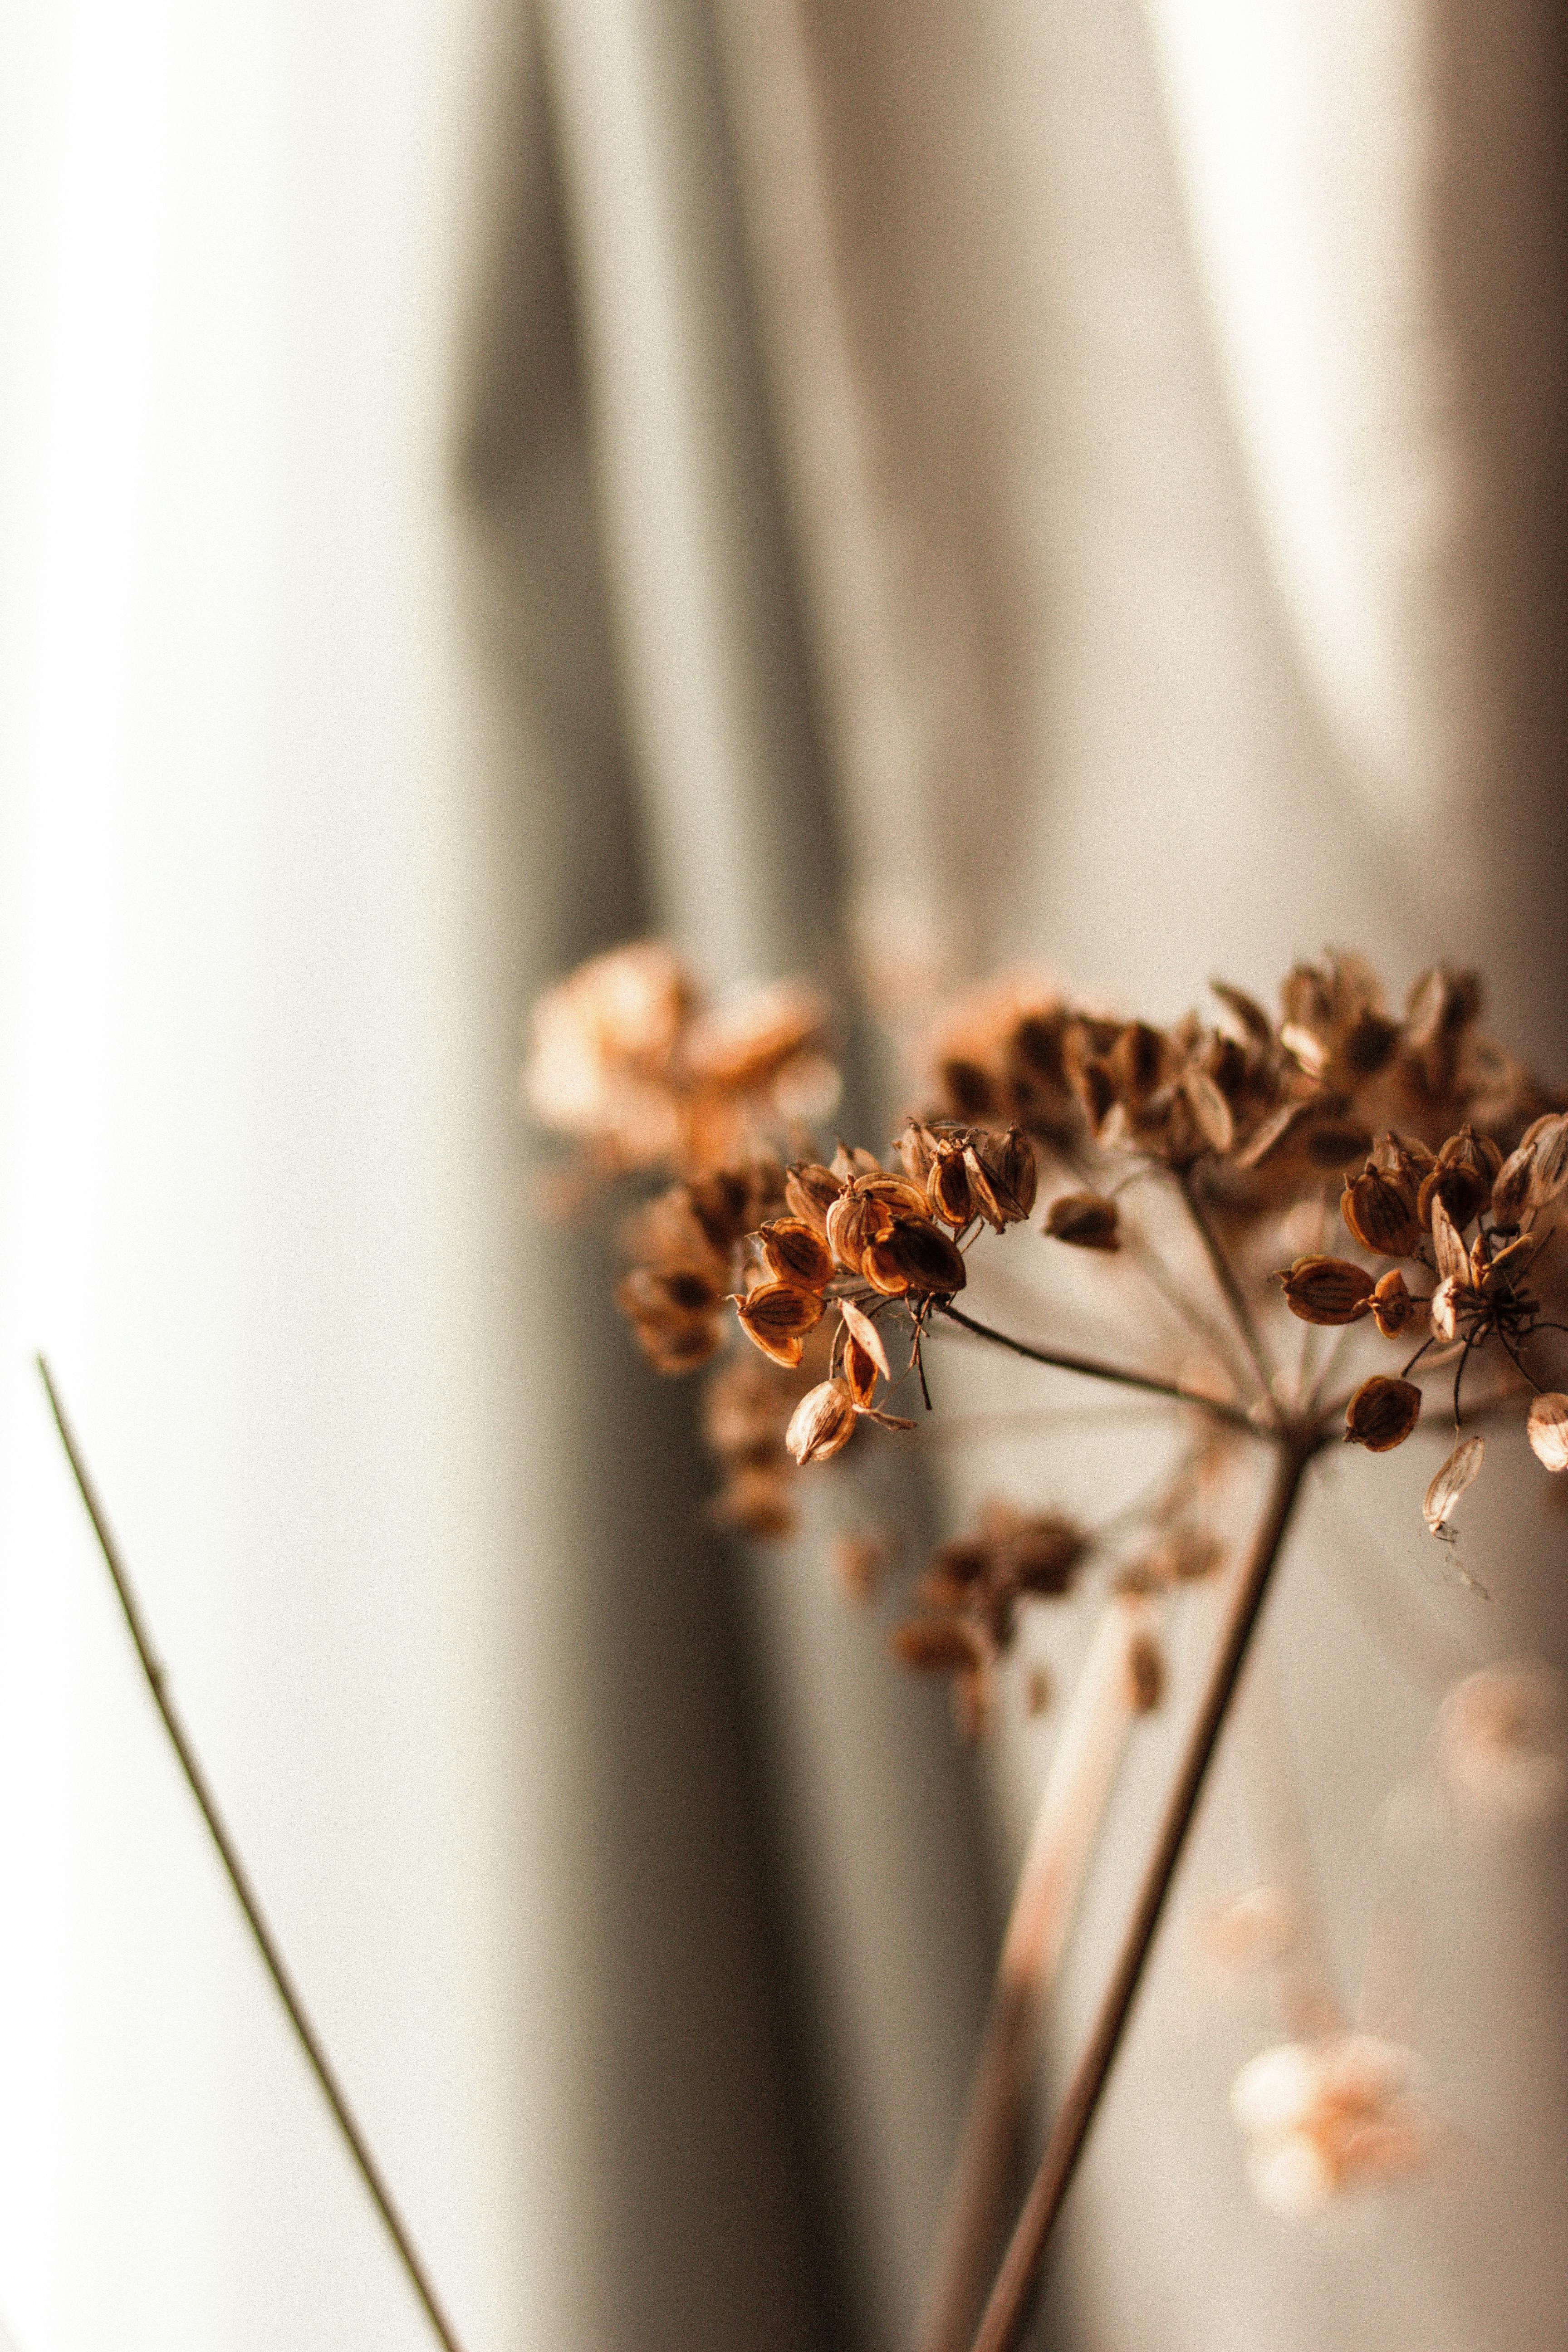 Download Flowers, Wallpaper, And Aesthetic Image - Light Brown